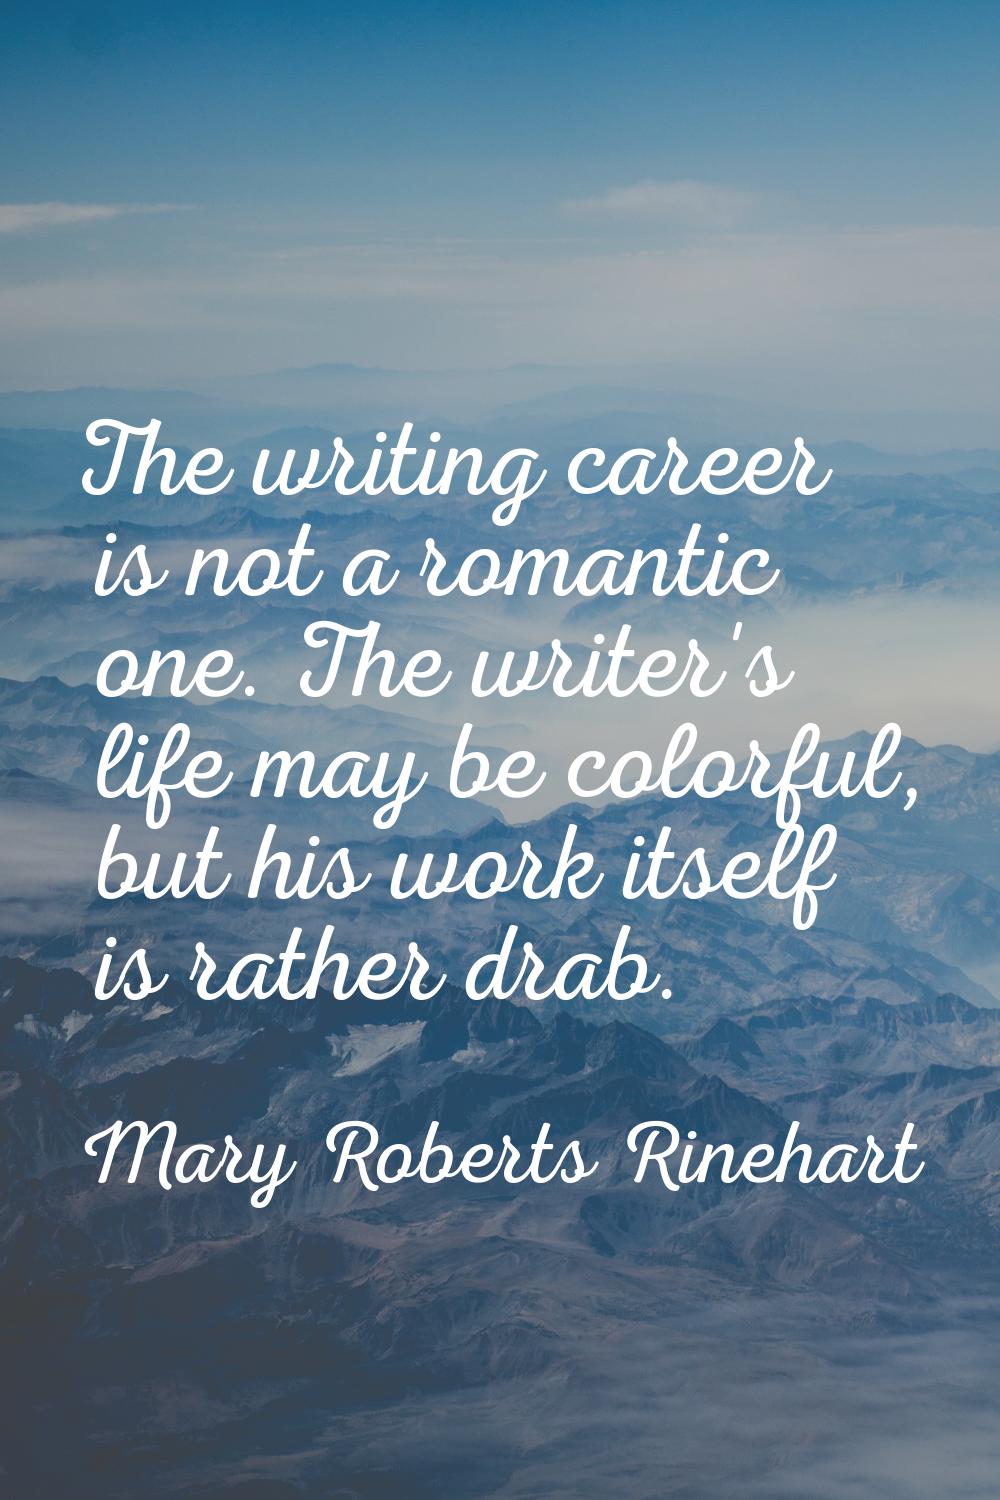 The writing career is not a romantic one. The writer's life may be colorful, but his work itself is